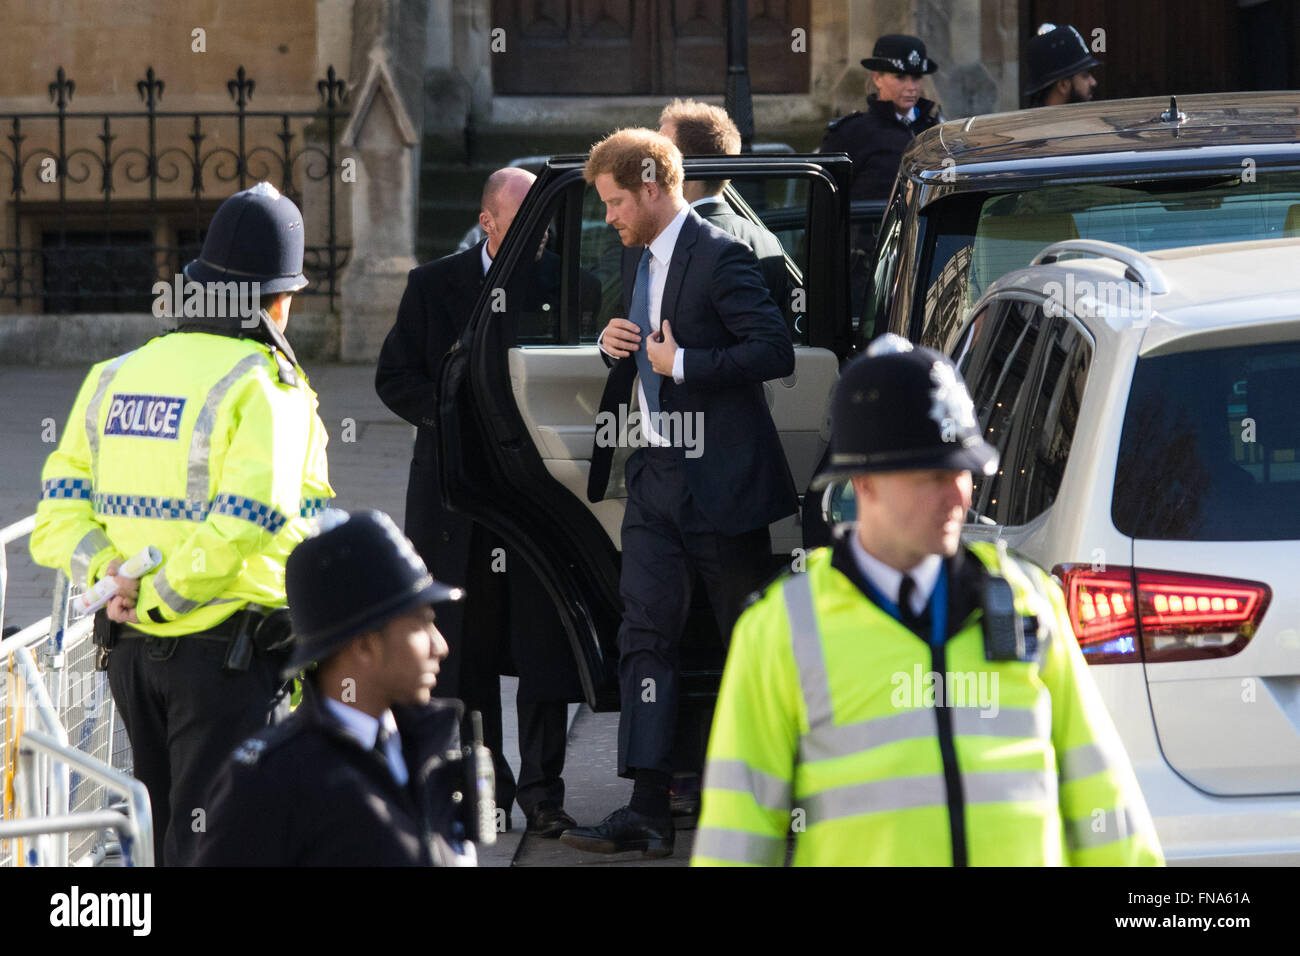 Westminster Abbey, London, March 14th 2016.  Her Majesty The Queen, Head of the Commonwealth, accompanied by The Duke of Edinburgh, The Duke and Duchess of Cambridge and Prince Harry attend the Commonwealth Service at Westminster Abbey on Commonwealth Day. PICTURED: Prince Harry arrives. Credit:  Paul Davey/Alamy Live News Stock Photo